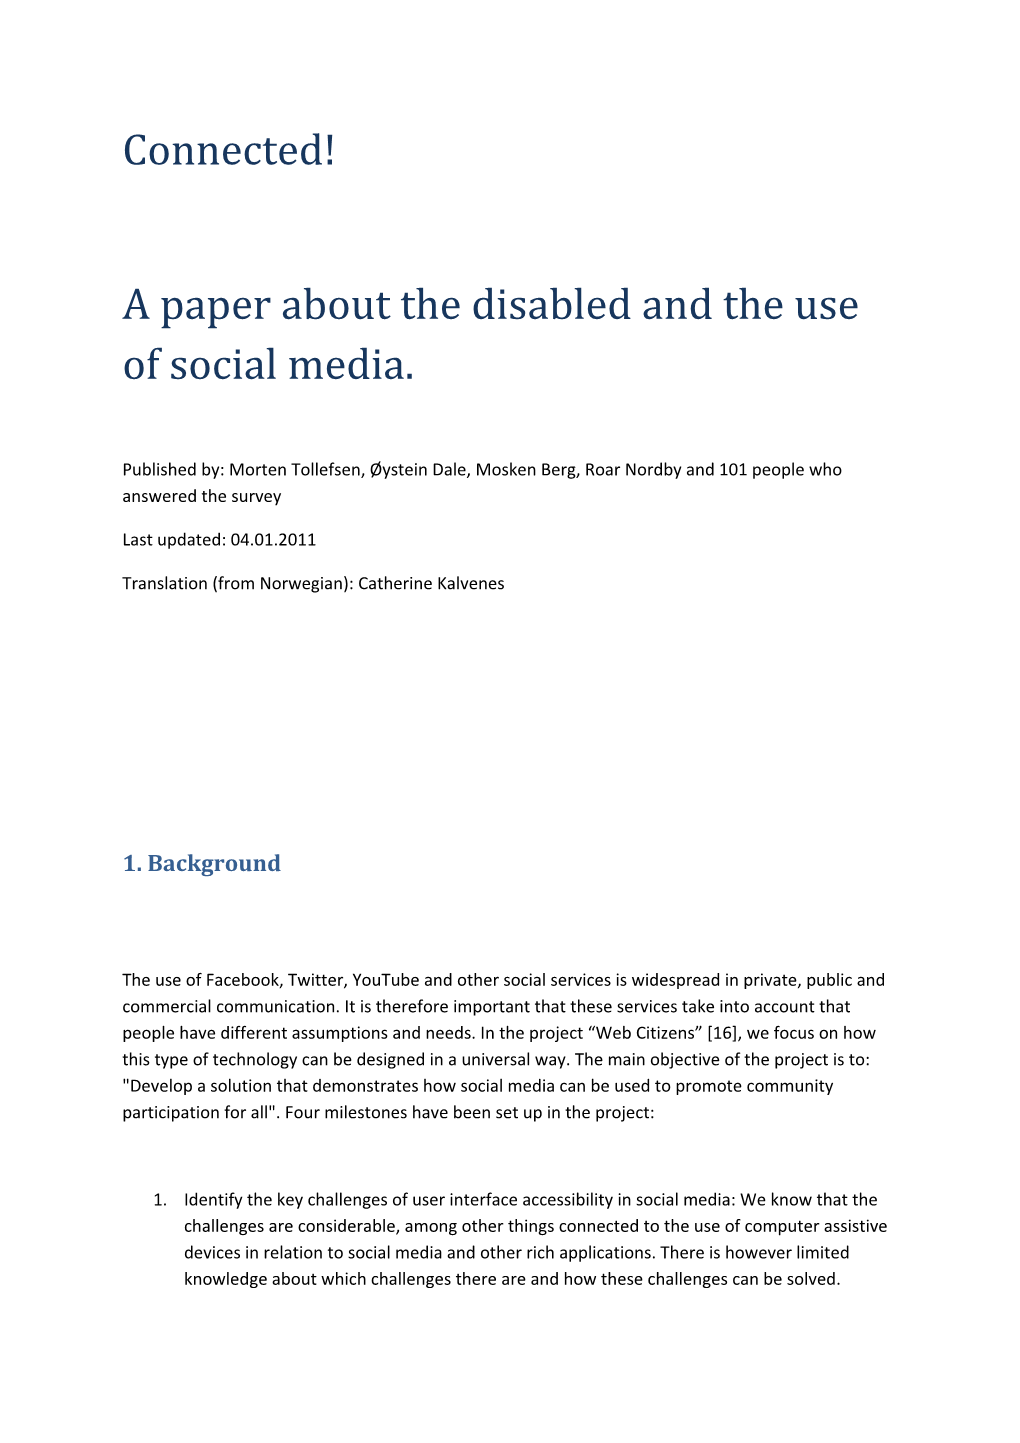 A Paper About the Disabled and the Use of Social Media